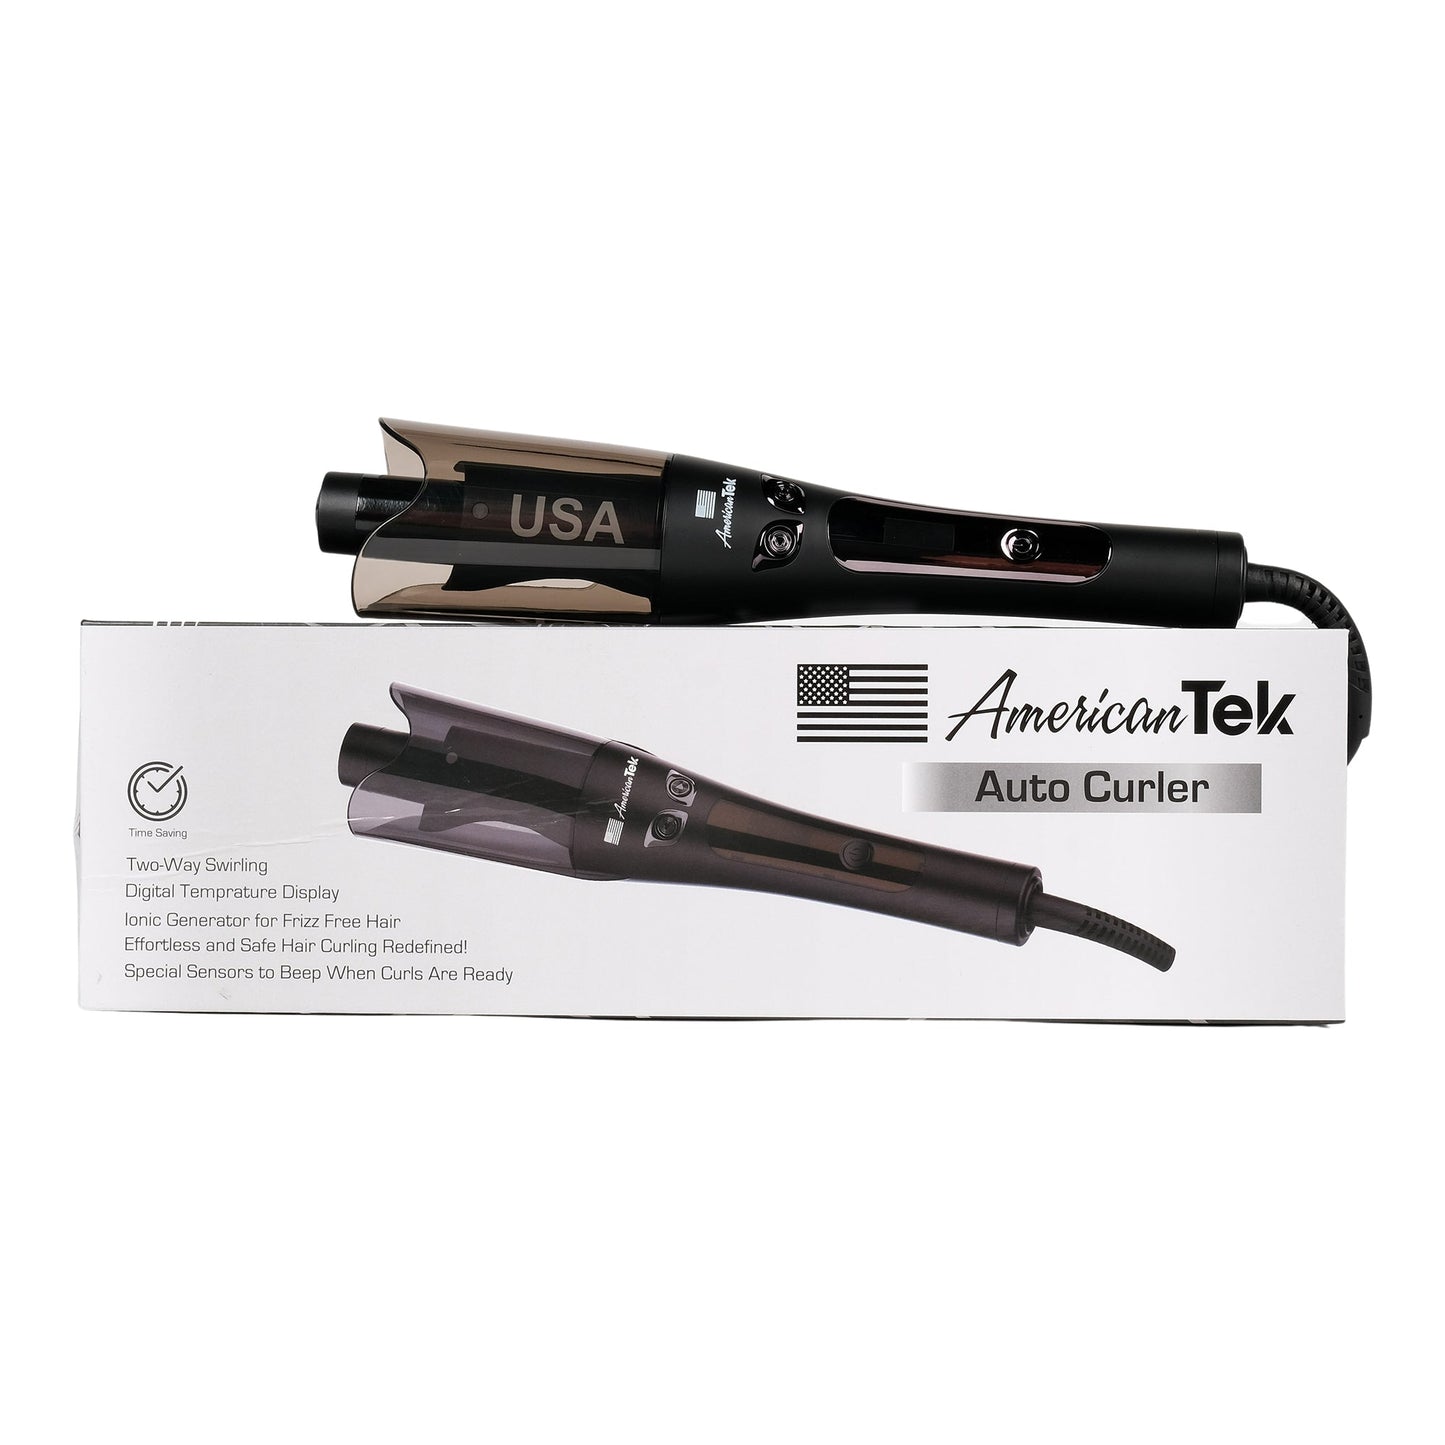 American Tek Automatic Curling Iorn Wand- Auto Curler with 4 Temperatures & 3 Timers & LCD Display, Curling Iron with 1" Large Rotating Barrel, Auto Shut-Off Spin Iron for Hair Styling - Black - Couture Hair Pro